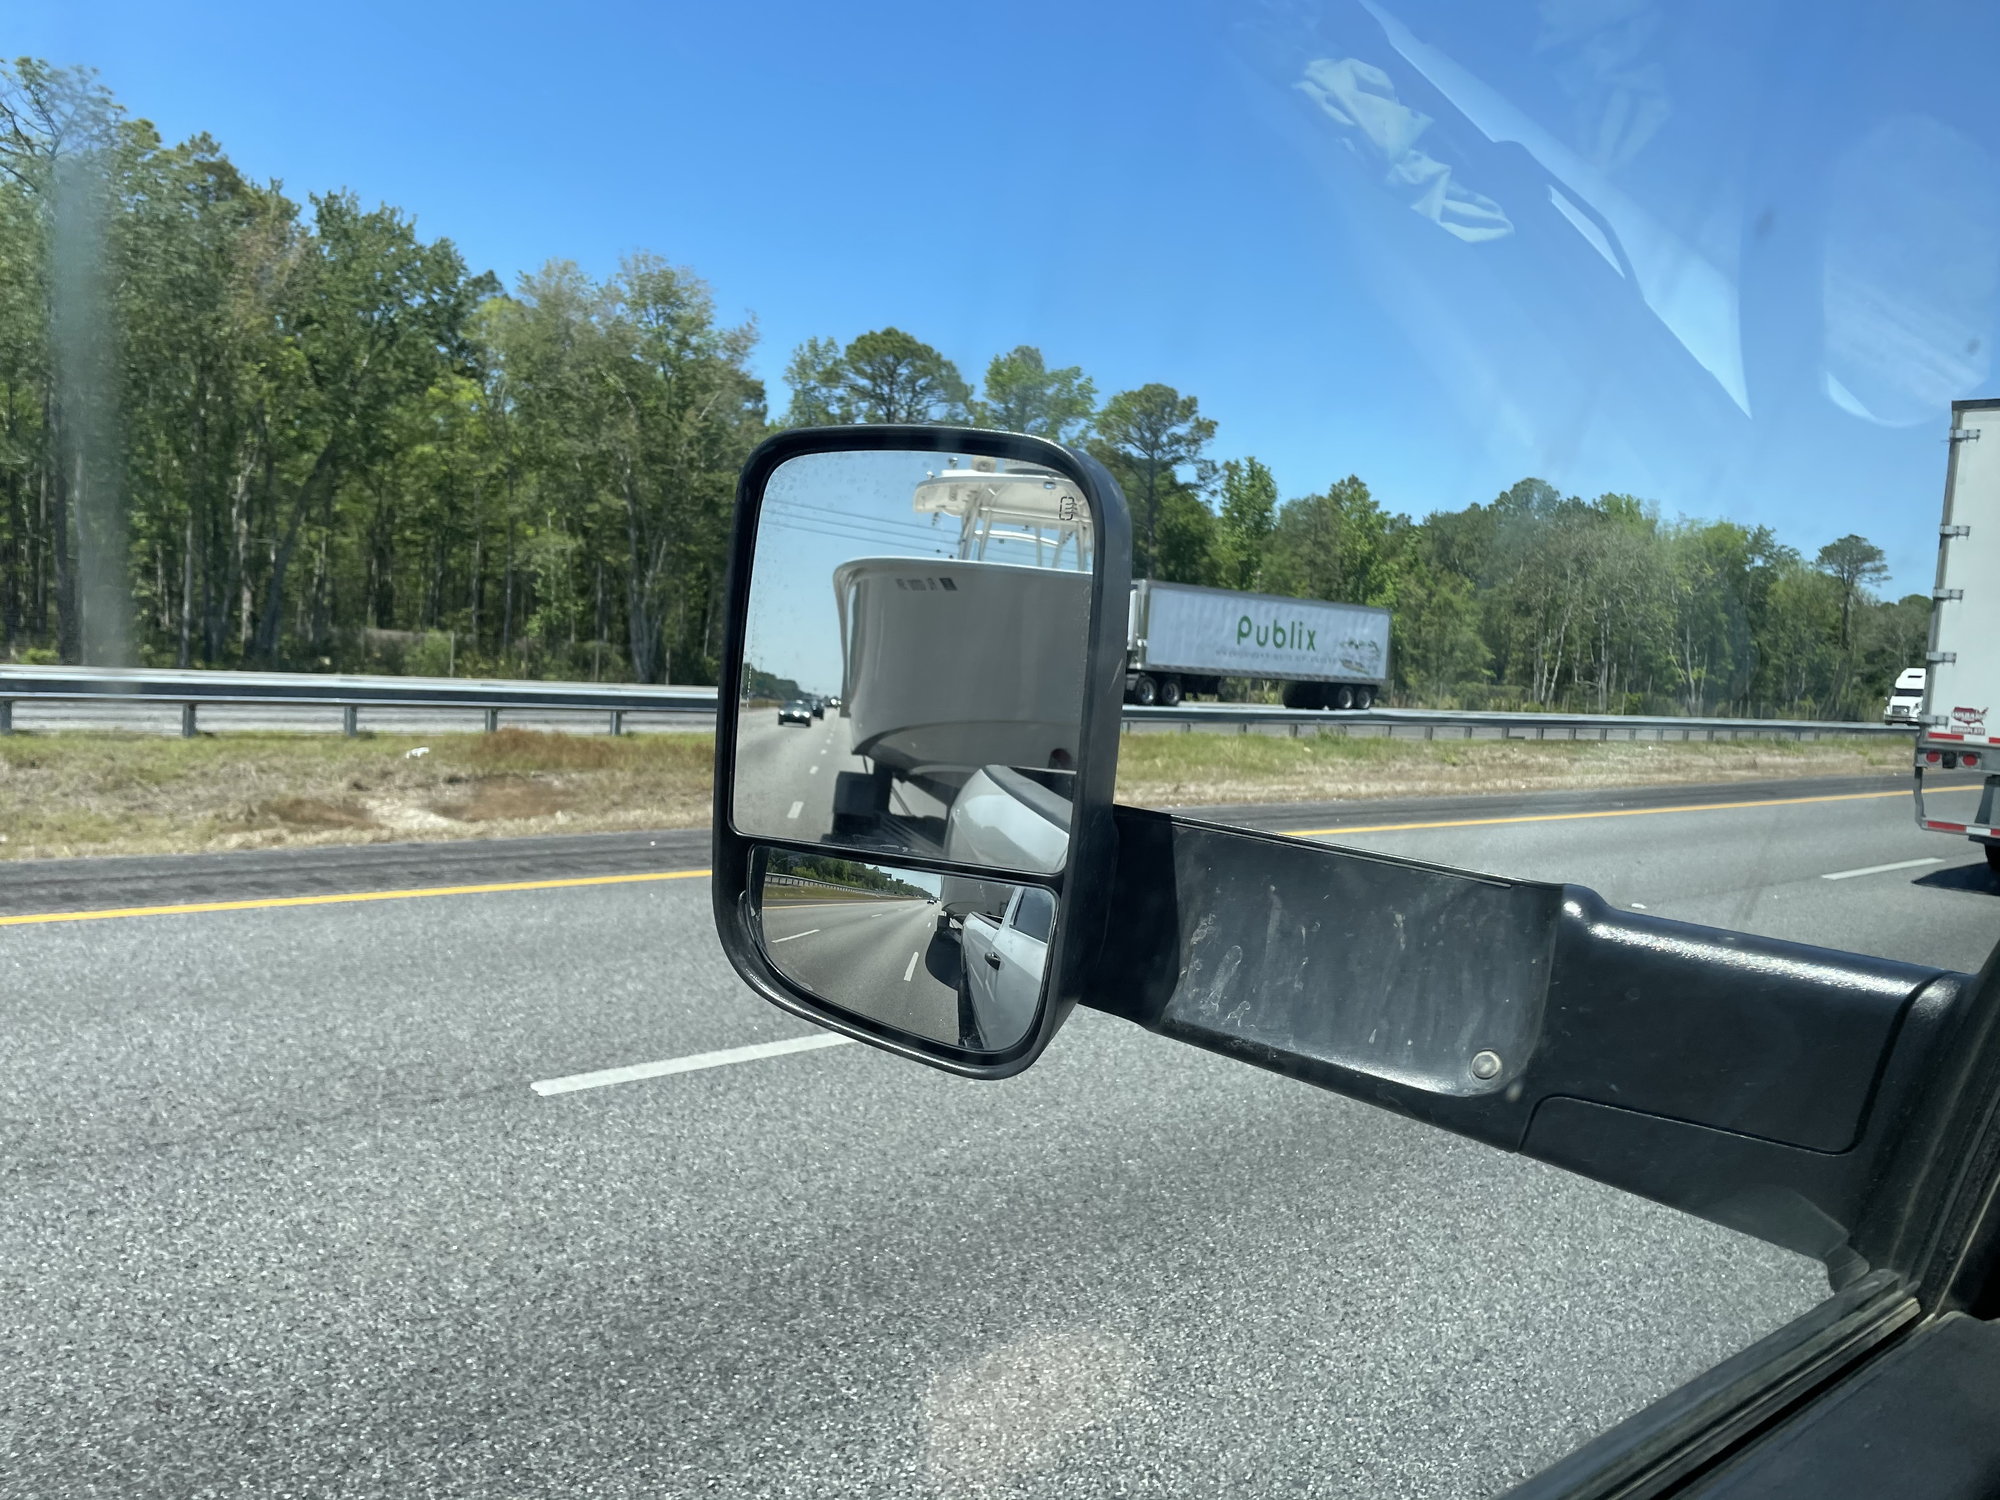 Rear view mirror repair question - The Hull Truth - Boating and